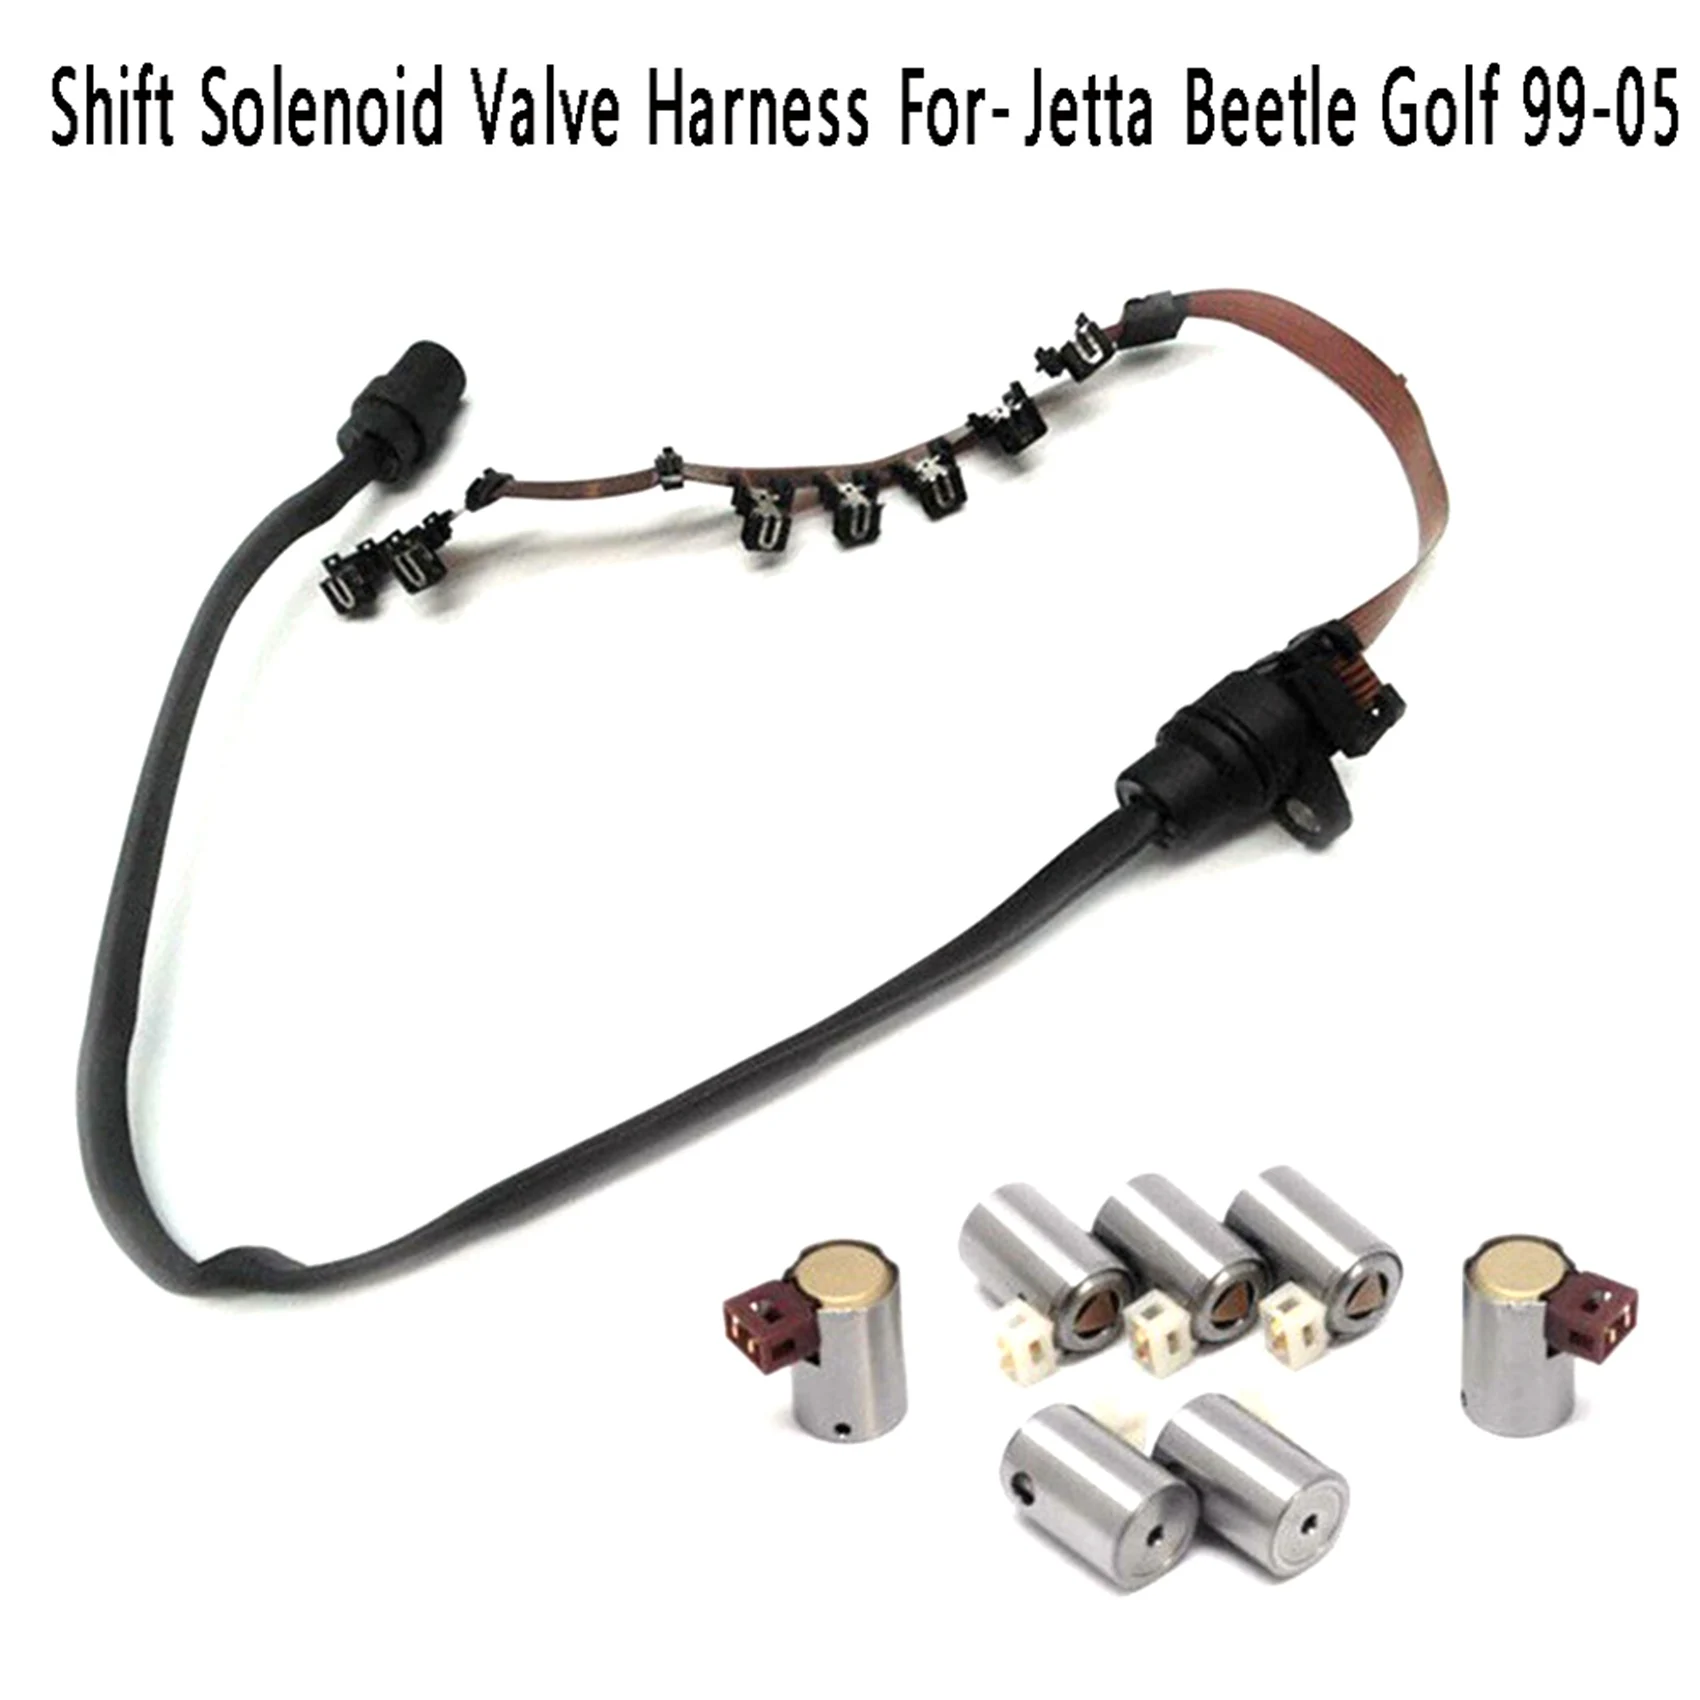 

Automatic Transmission Valve Harness Shift Solenoid Valve Harness 01M325283A 01M325039F for-VW Jetta Beetle Golf 99-05